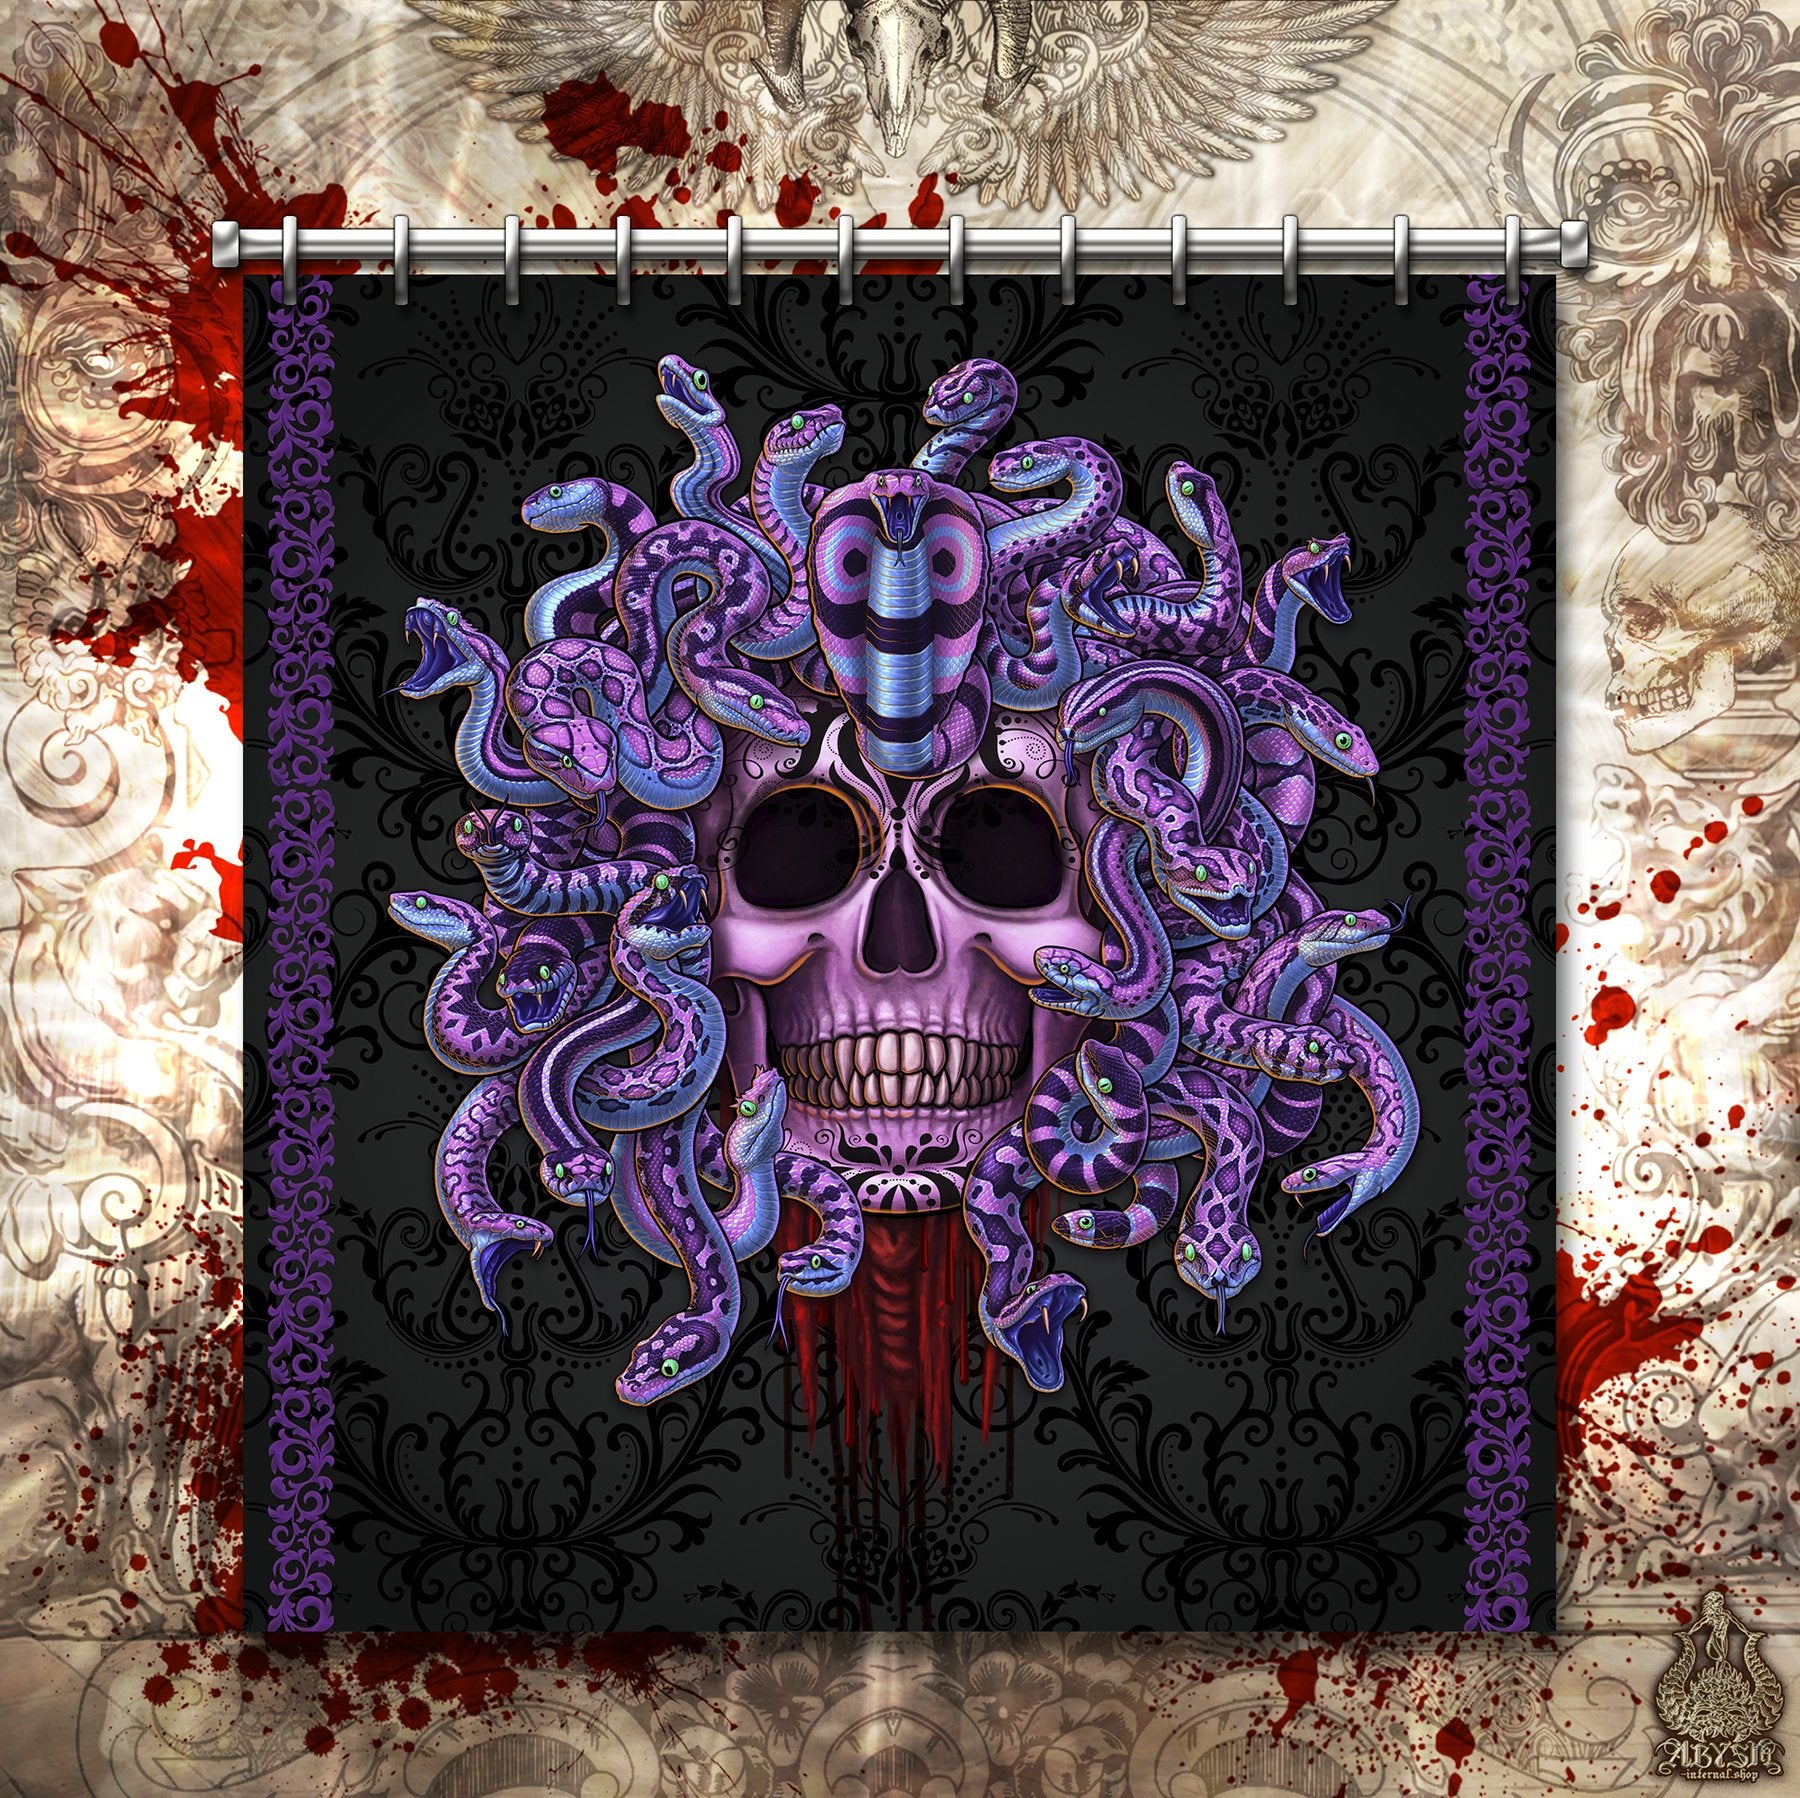 Pastel Goth Shower Curtain, 71x74 inches, Medusa Skull, Black and Purple Bathroom Decor, Whimsigoth Style - 2 Faces - Abysm Internal